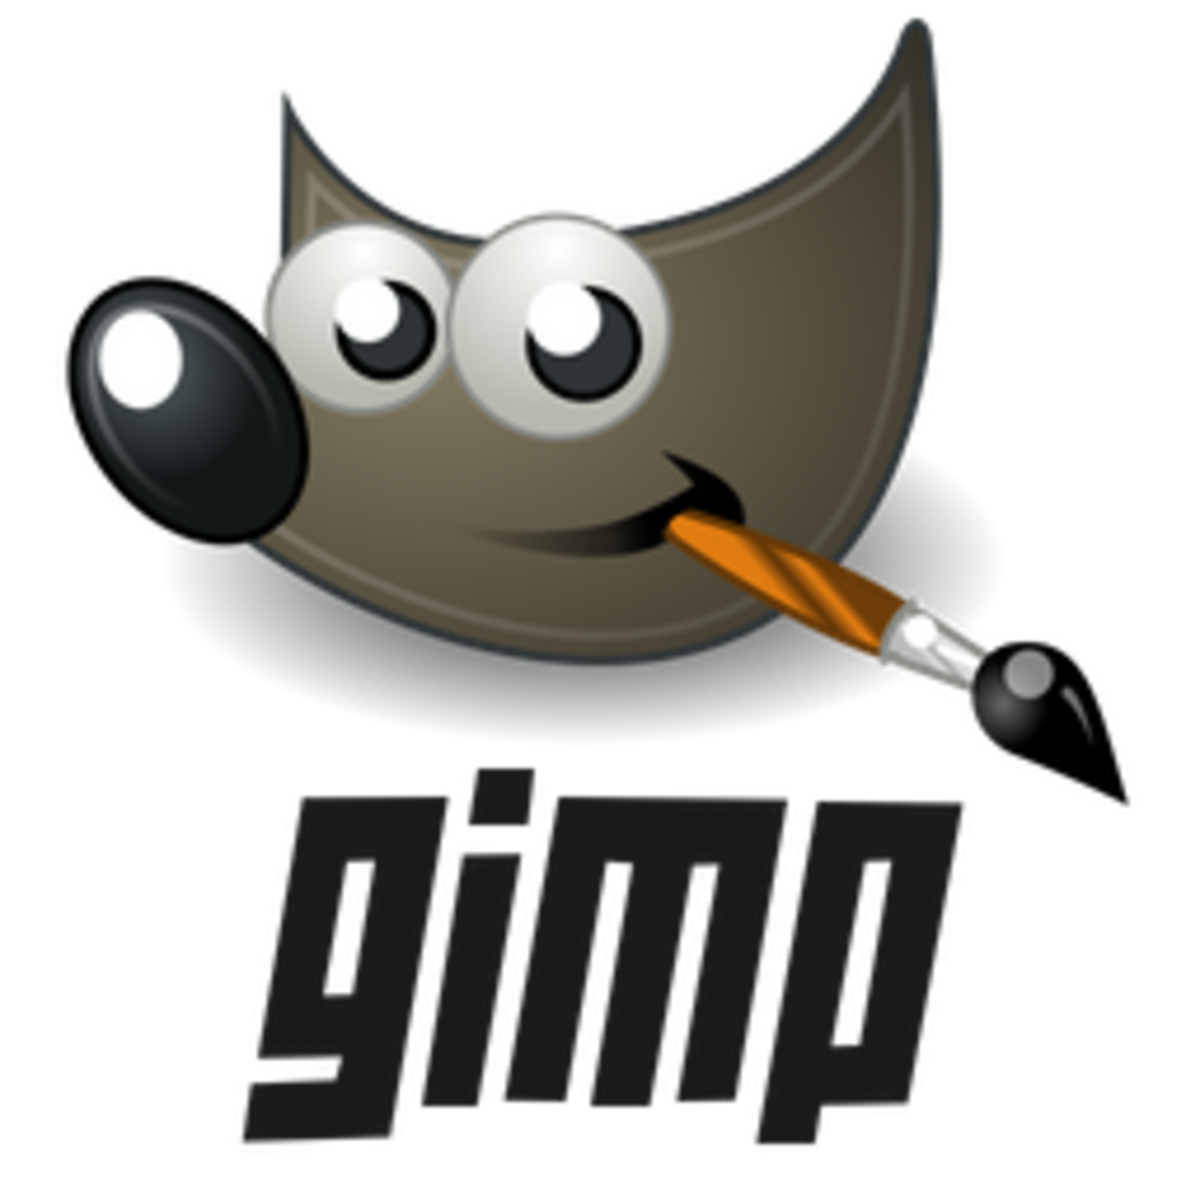 GIMP Is a one of the most popular graphical editors that has many of Photoshop's features and it's free.